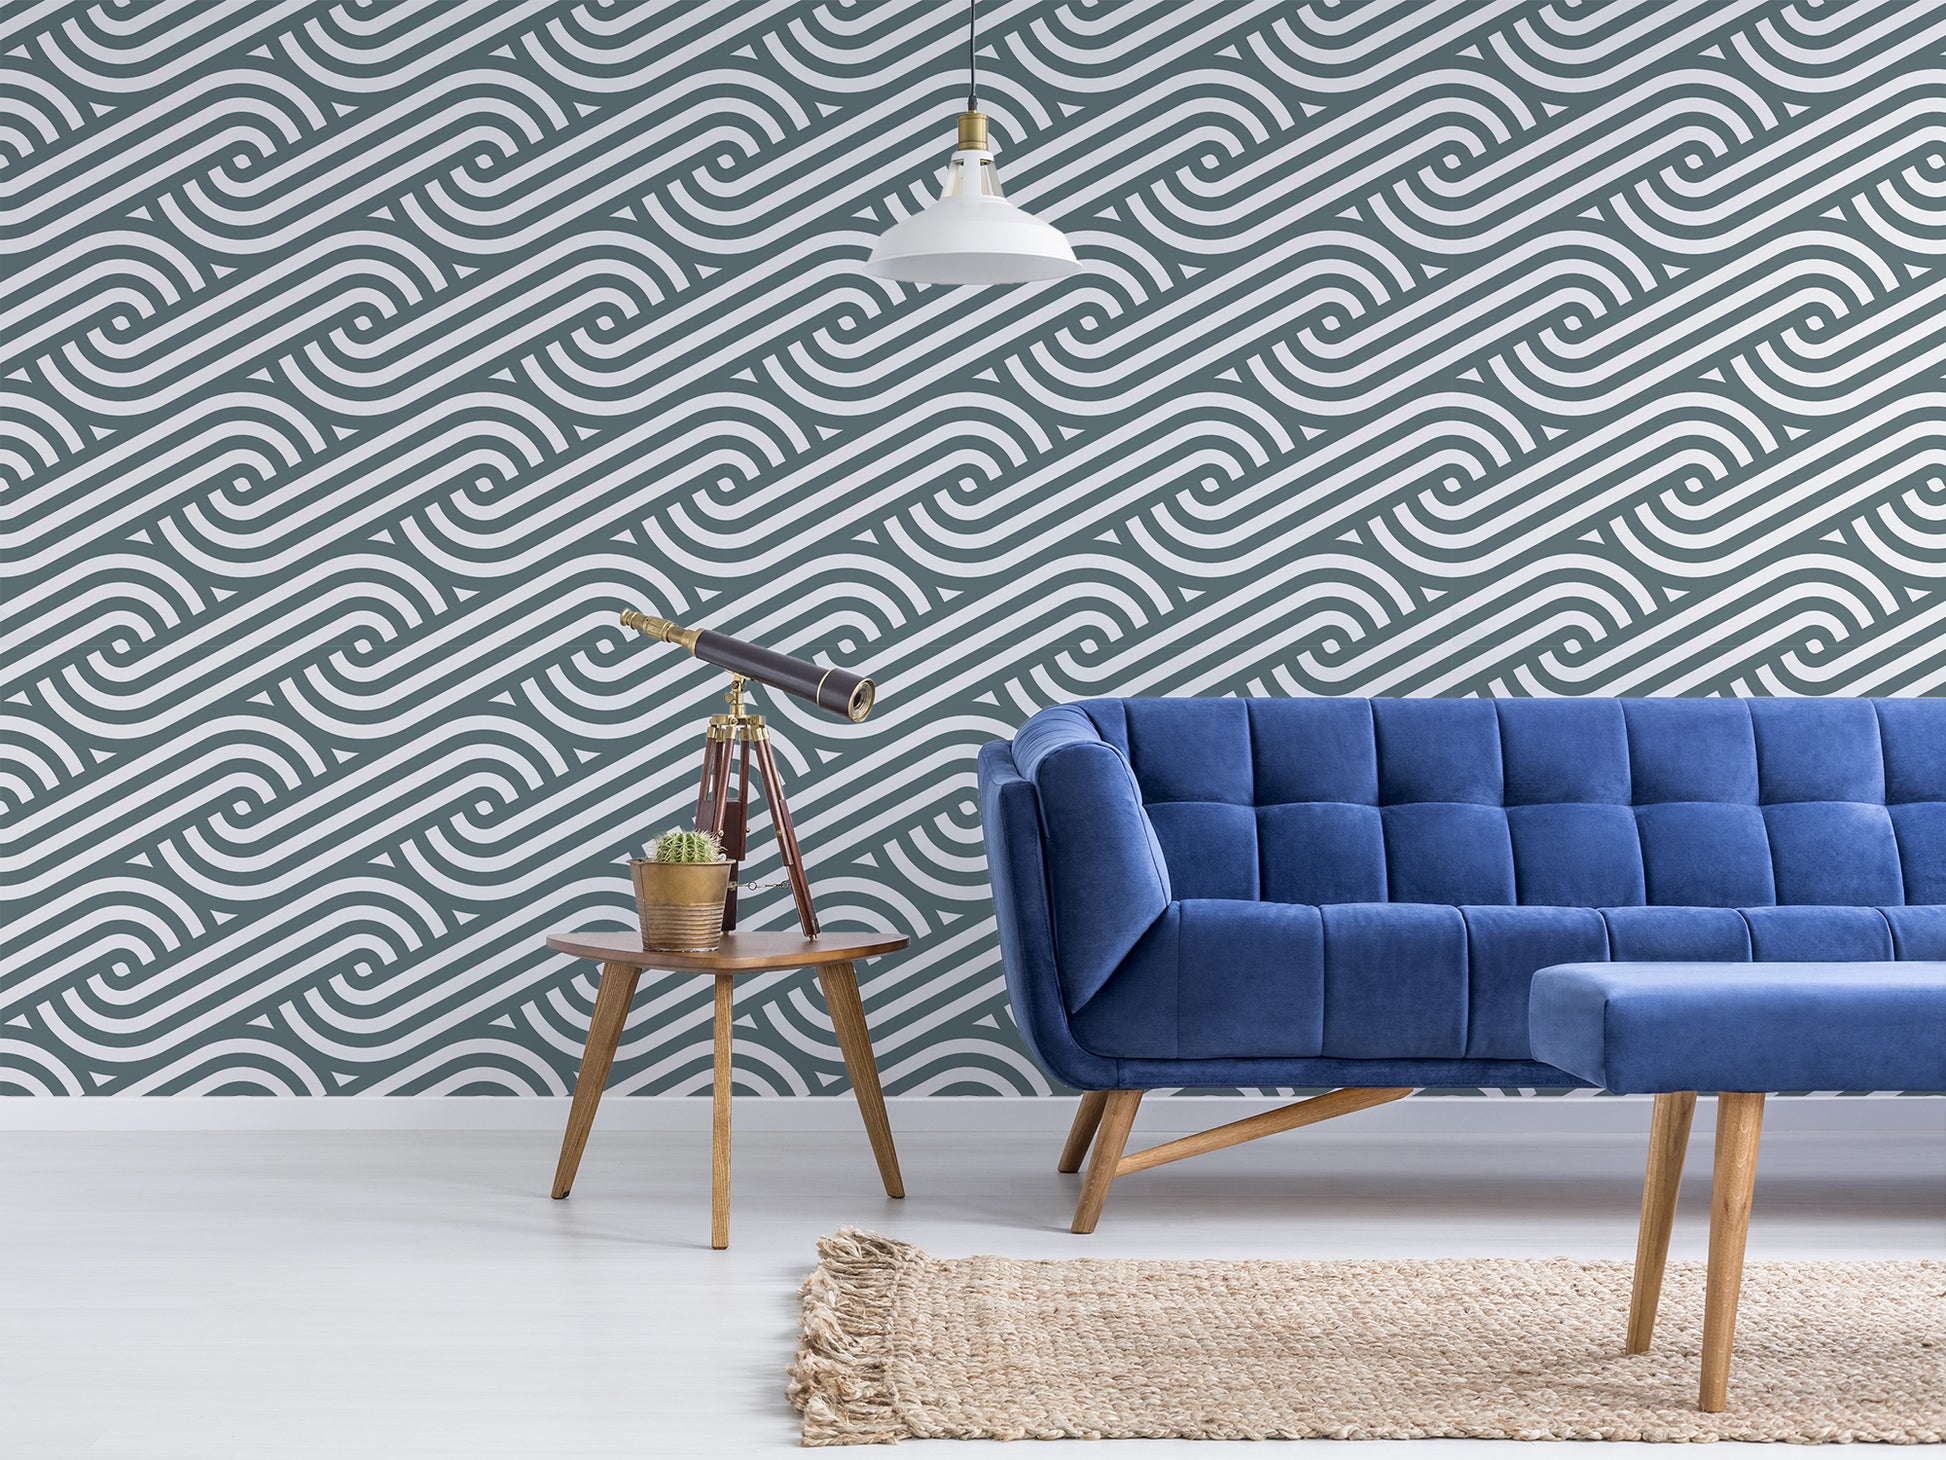 Cordell Light Blue Geometric Wave Wallpaper in a Living Room with Blue Sofa and accent Telescope